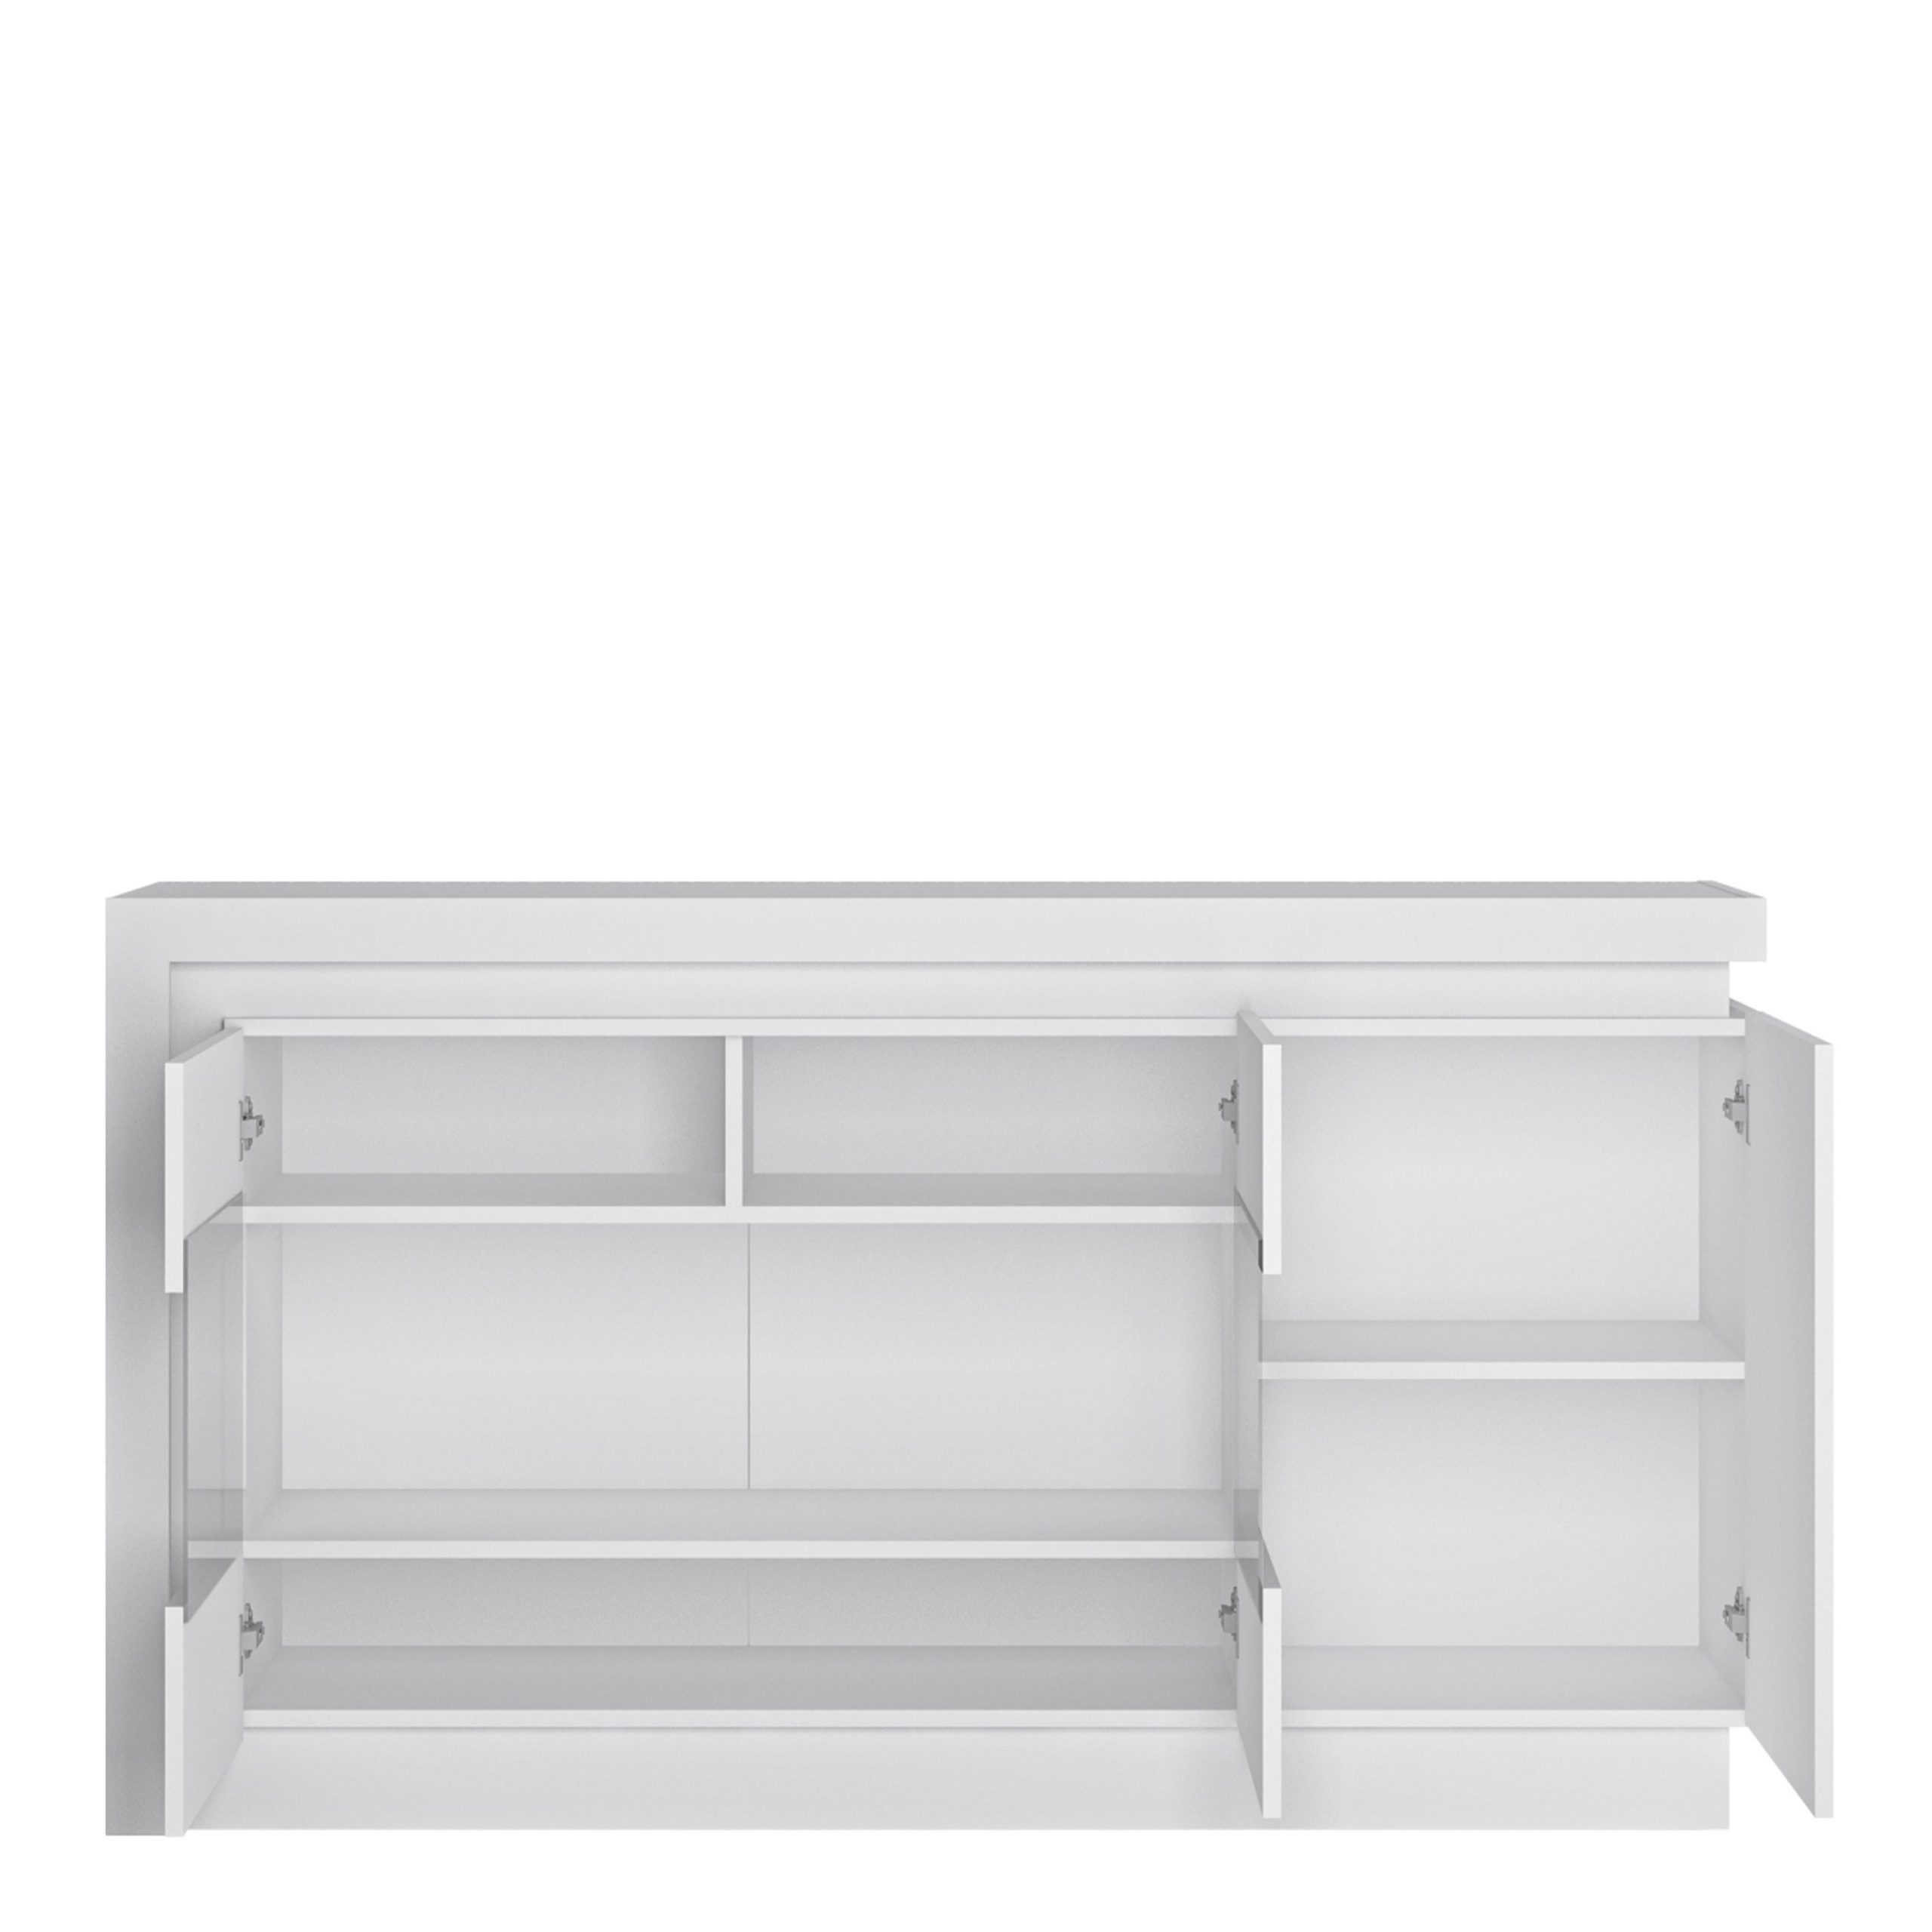 Lyon 3 Door Glazed Sideboard (including LED Lighting) In White And High Gloss